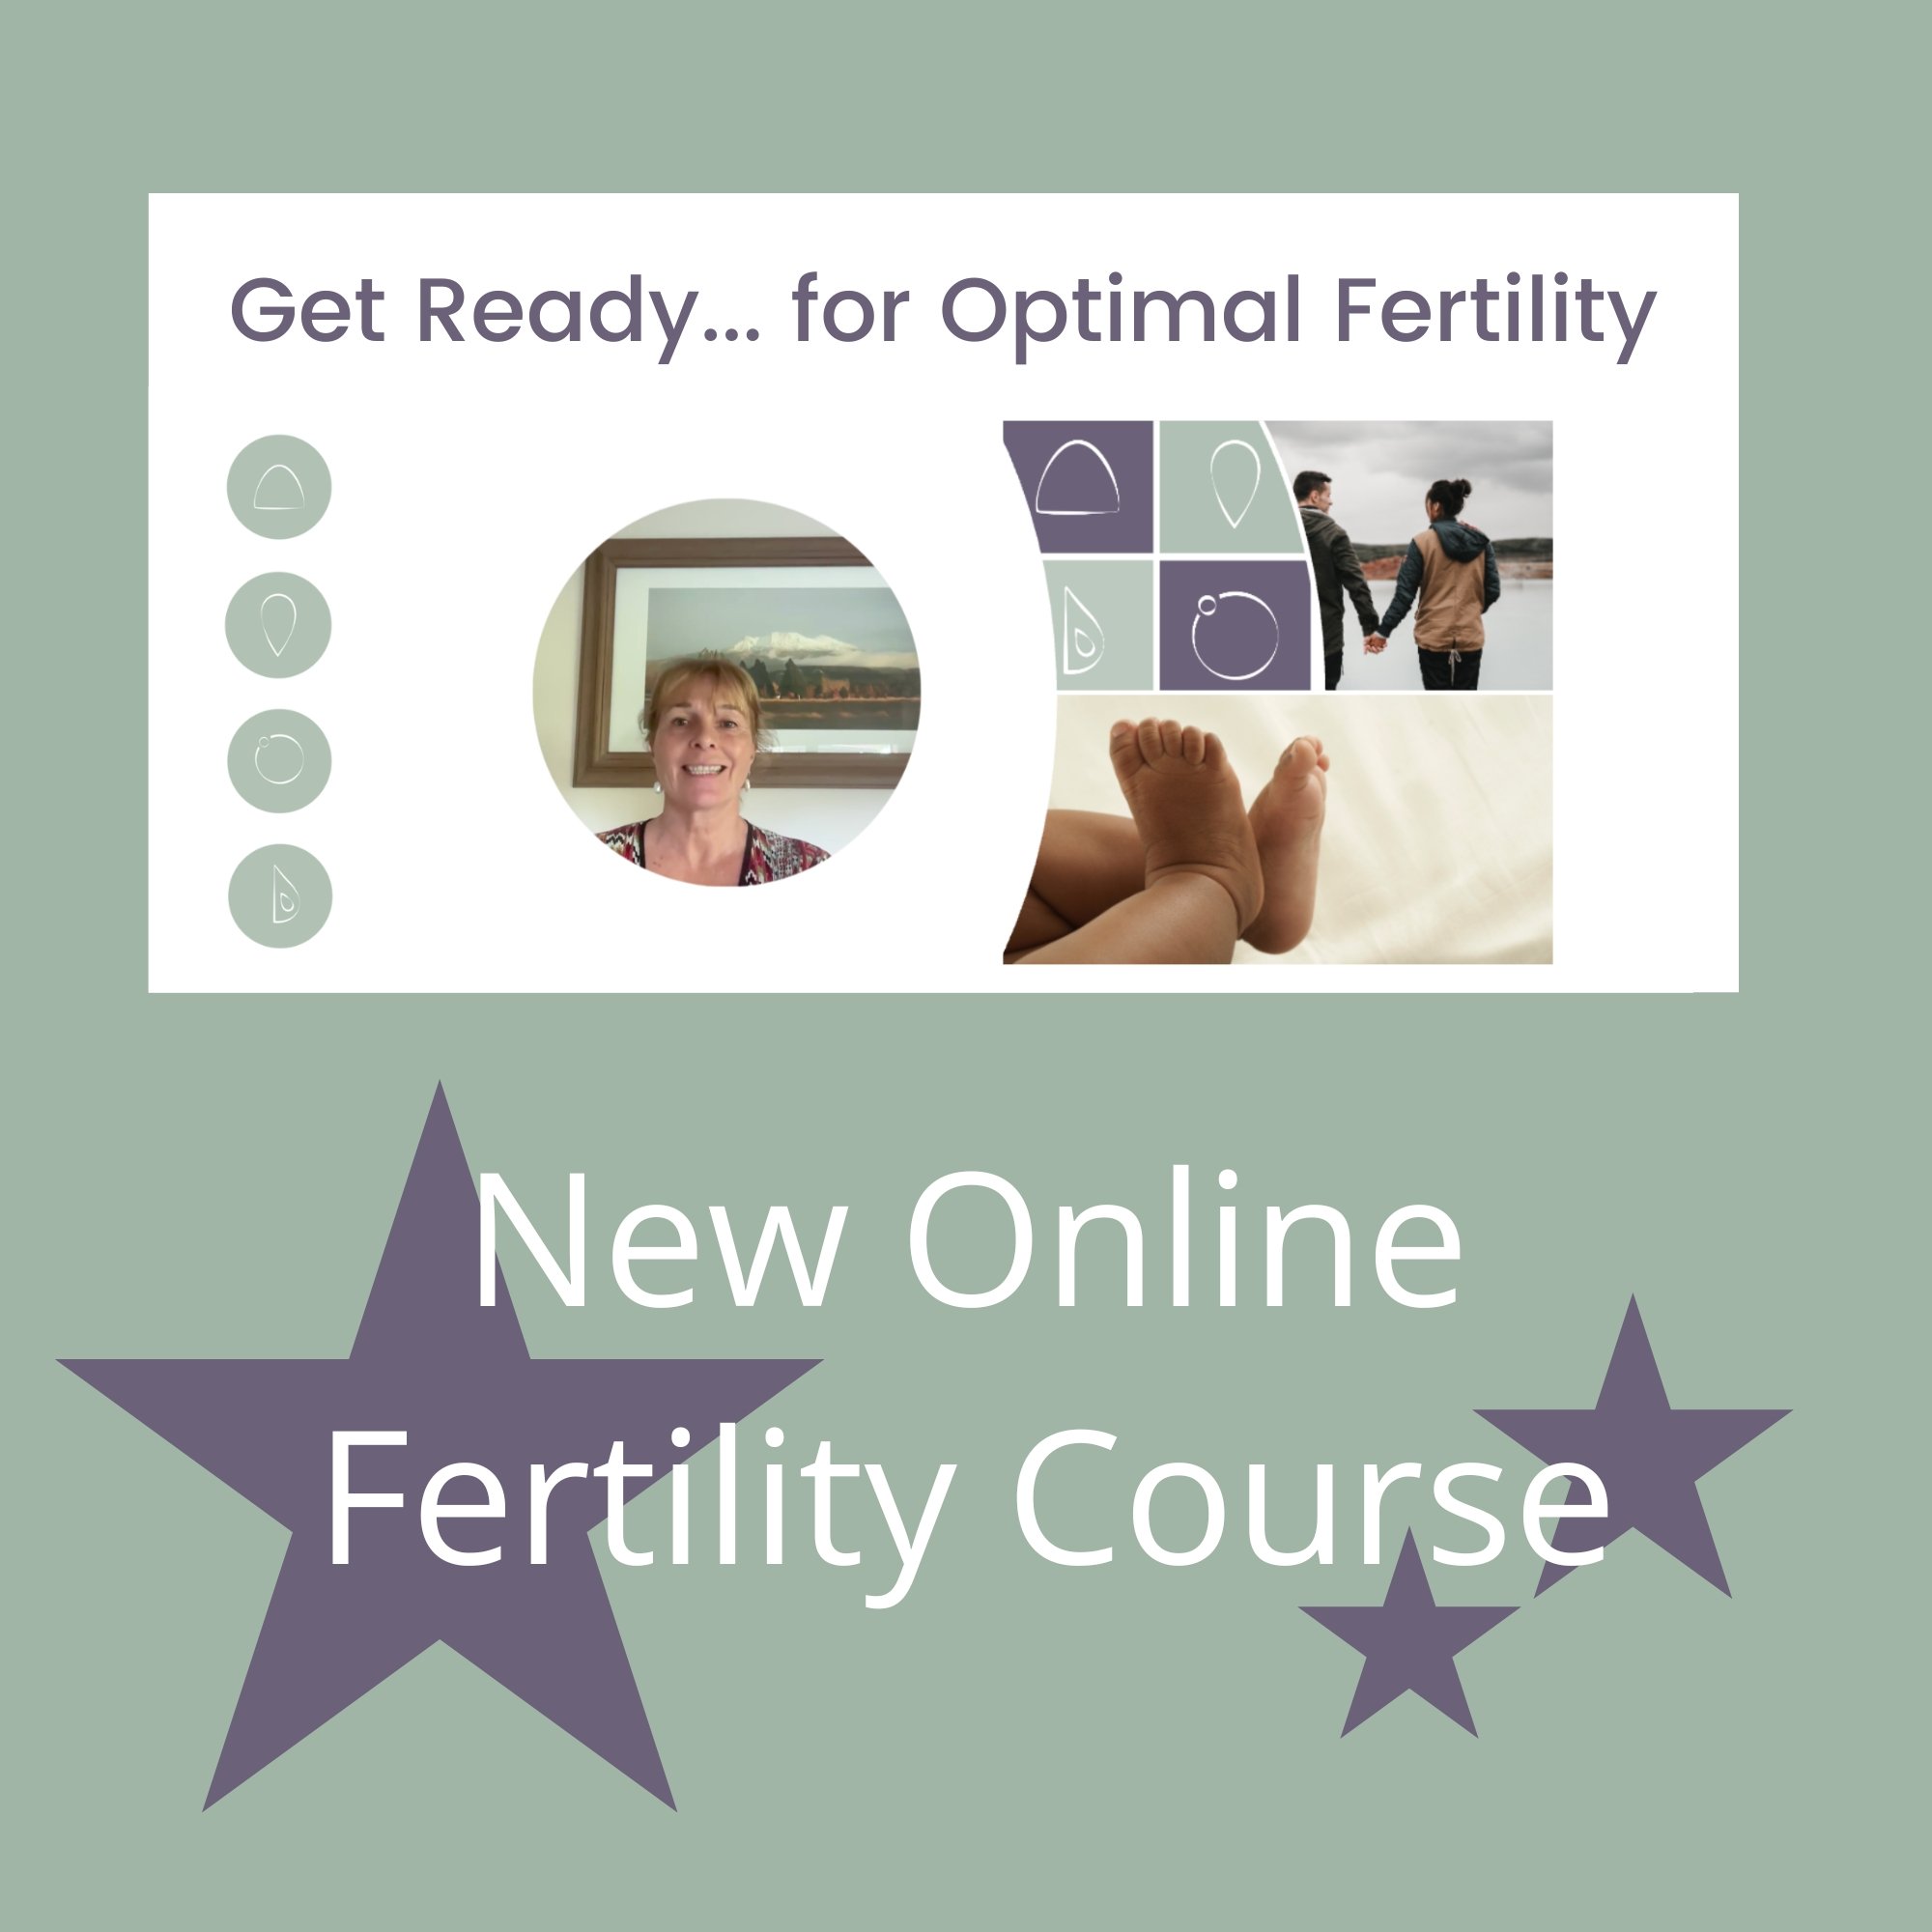 Plan your path to conception.
Join the new online optimal fertility course. I'm thrilled to provide this comprehensive five-module Fertility Preparation Course. Designed to empower individuals and couples on their journey towards parenthood, this cou